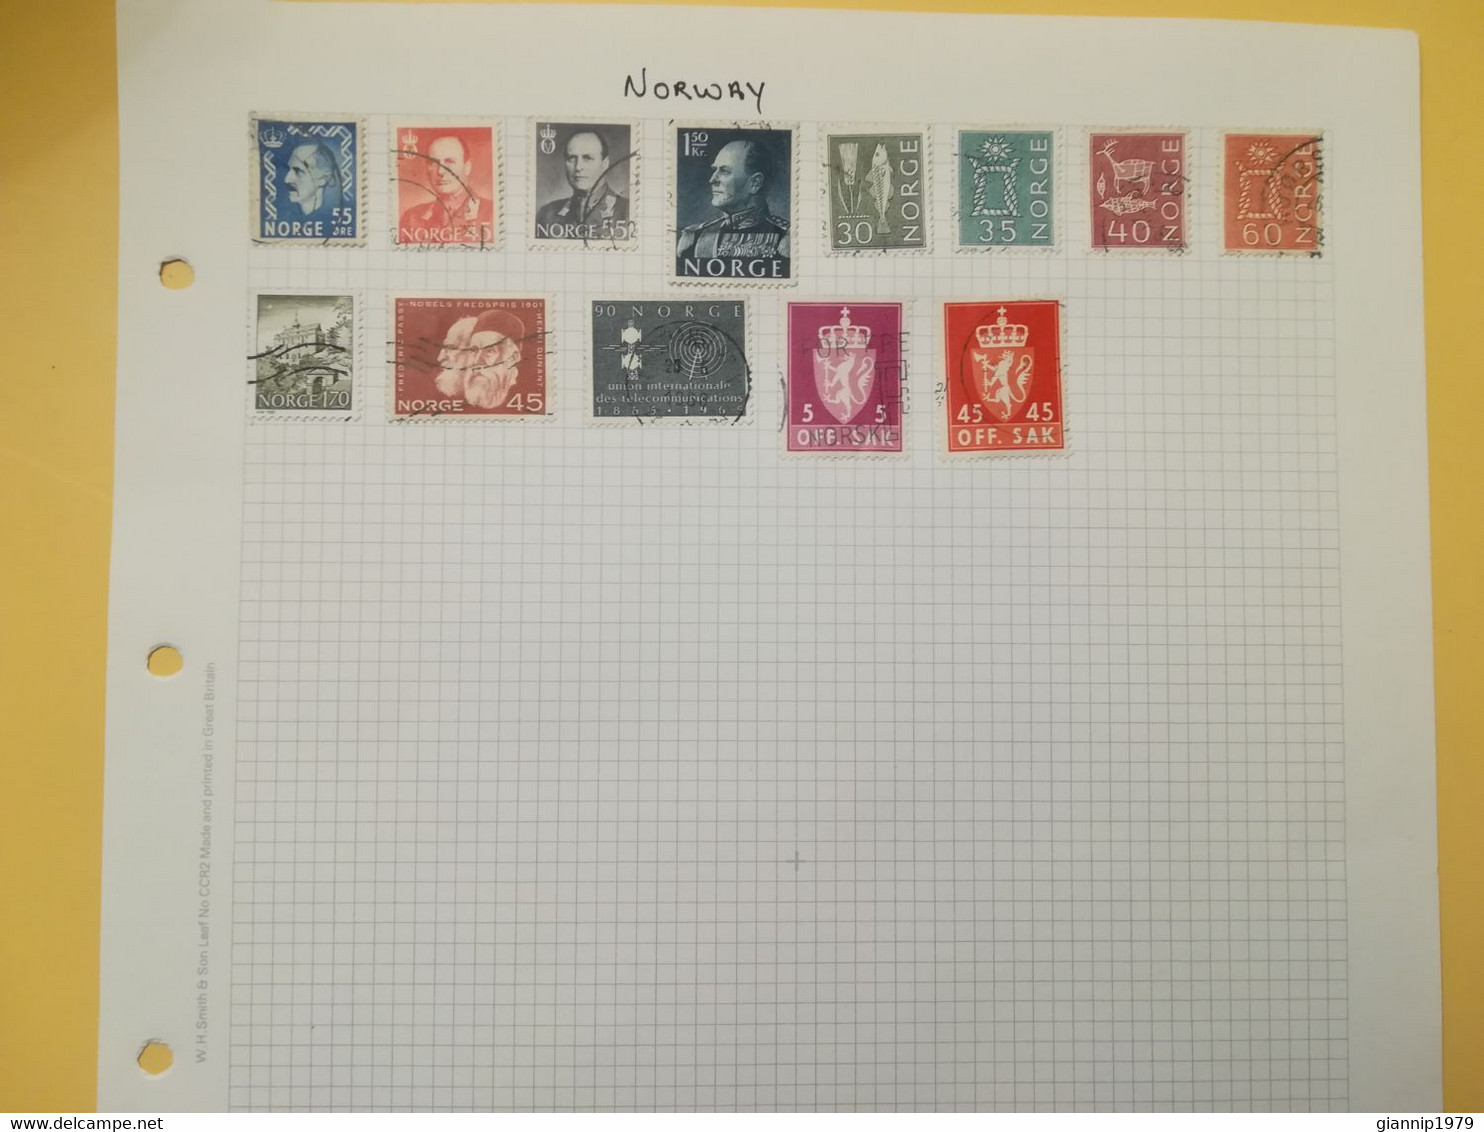 PAGINA PAGE ALBUM NORVEGIA NORGE NORWAY 1951 ATTACCATI PAGE WITH STAMPS COLLEZIONI LOTTO LOT LOTS - Verzamelingen